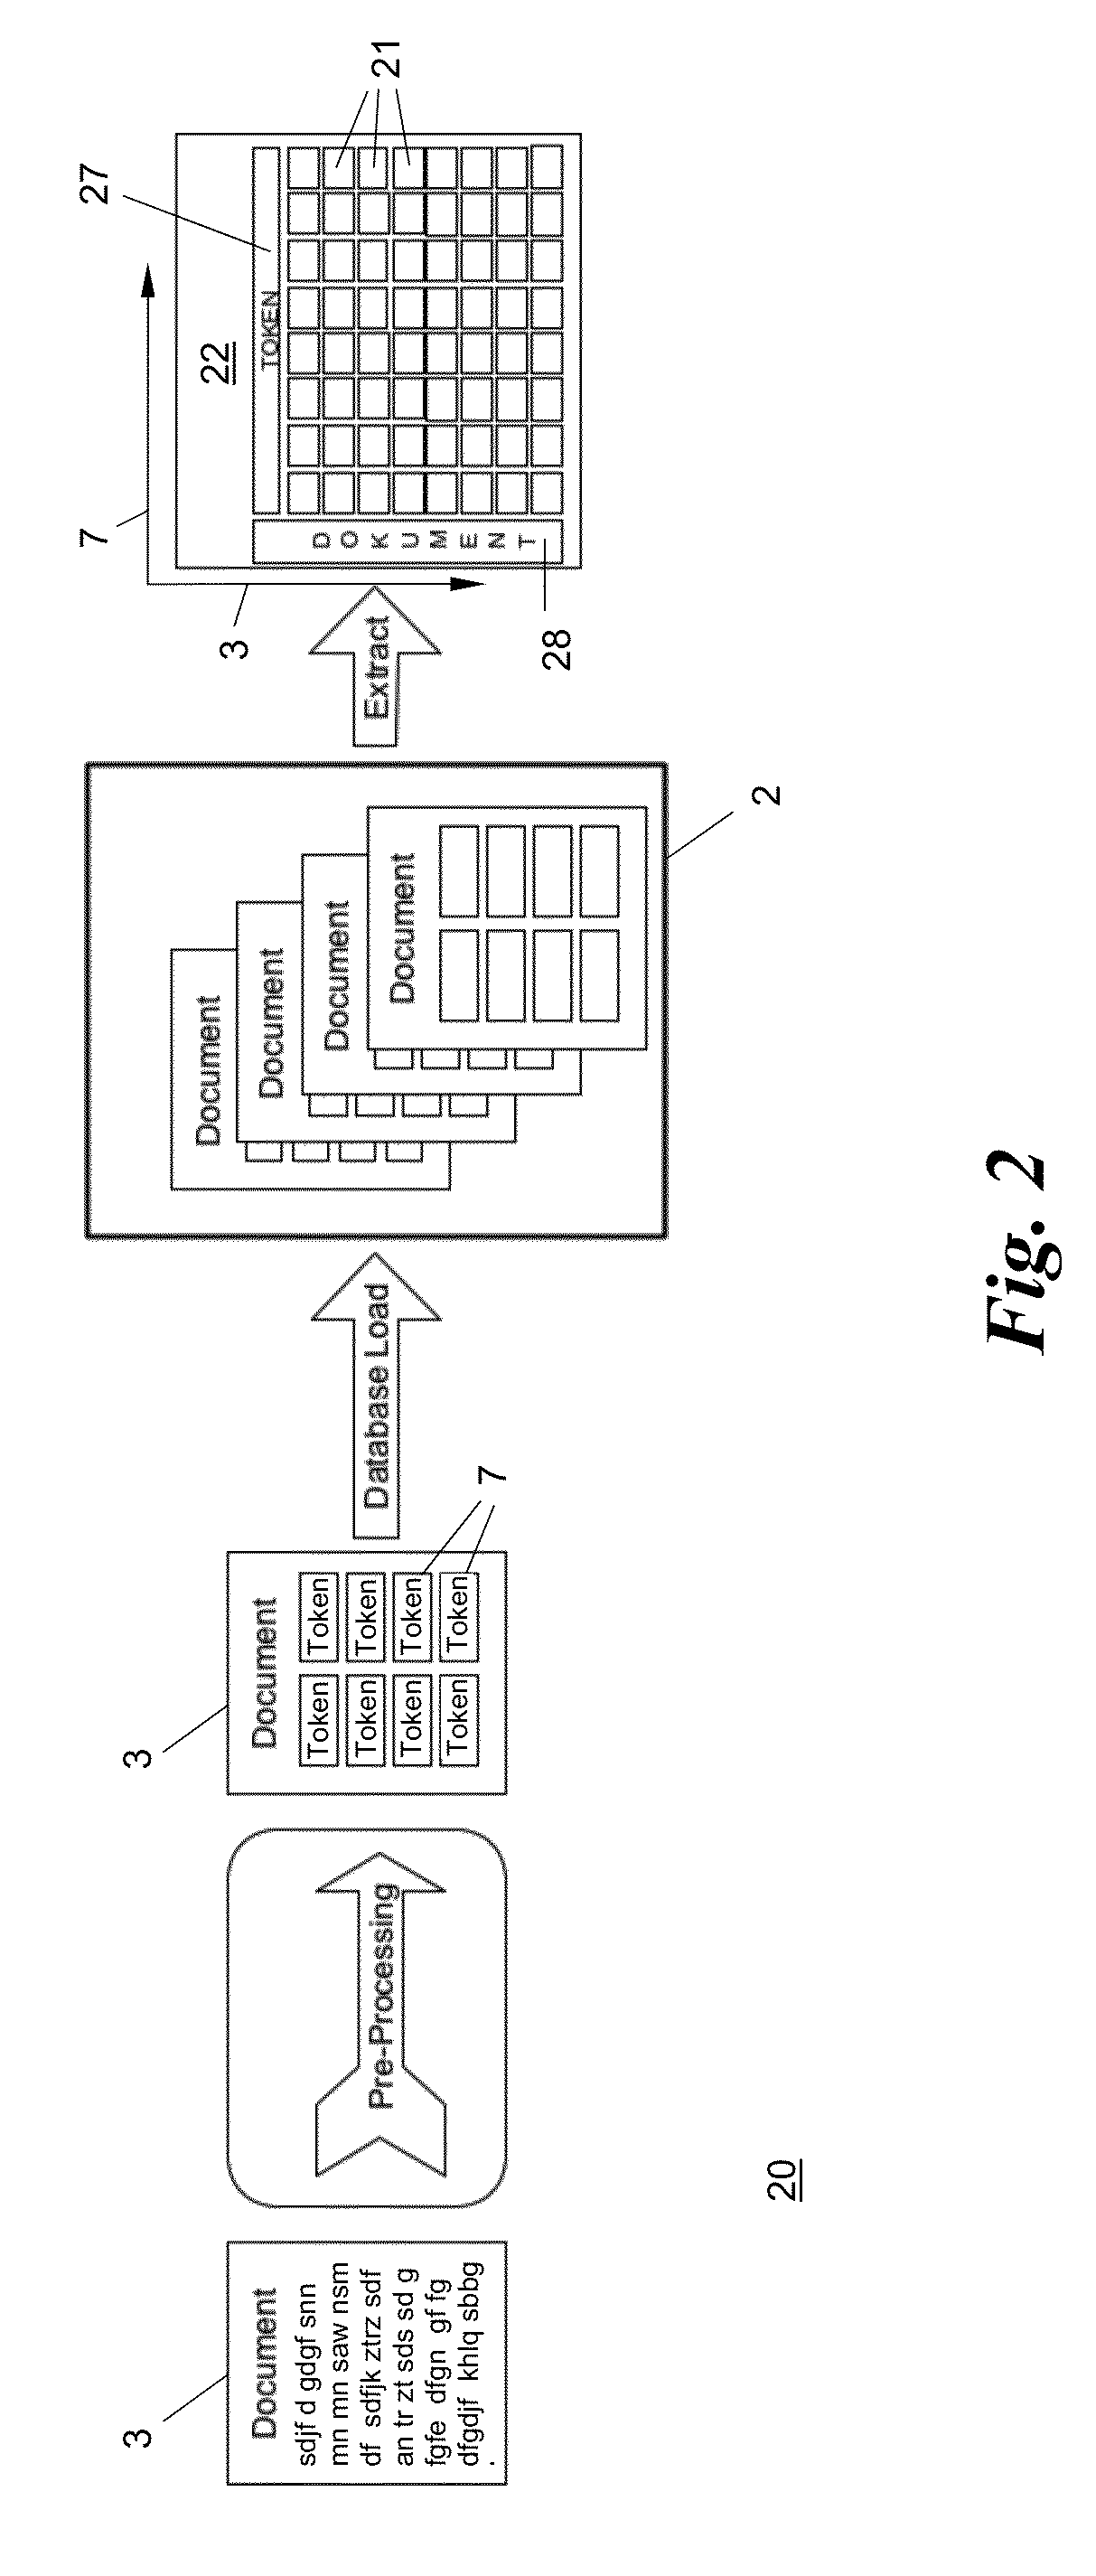 Methods, Apparatus and Products for Semantic Processing of Text